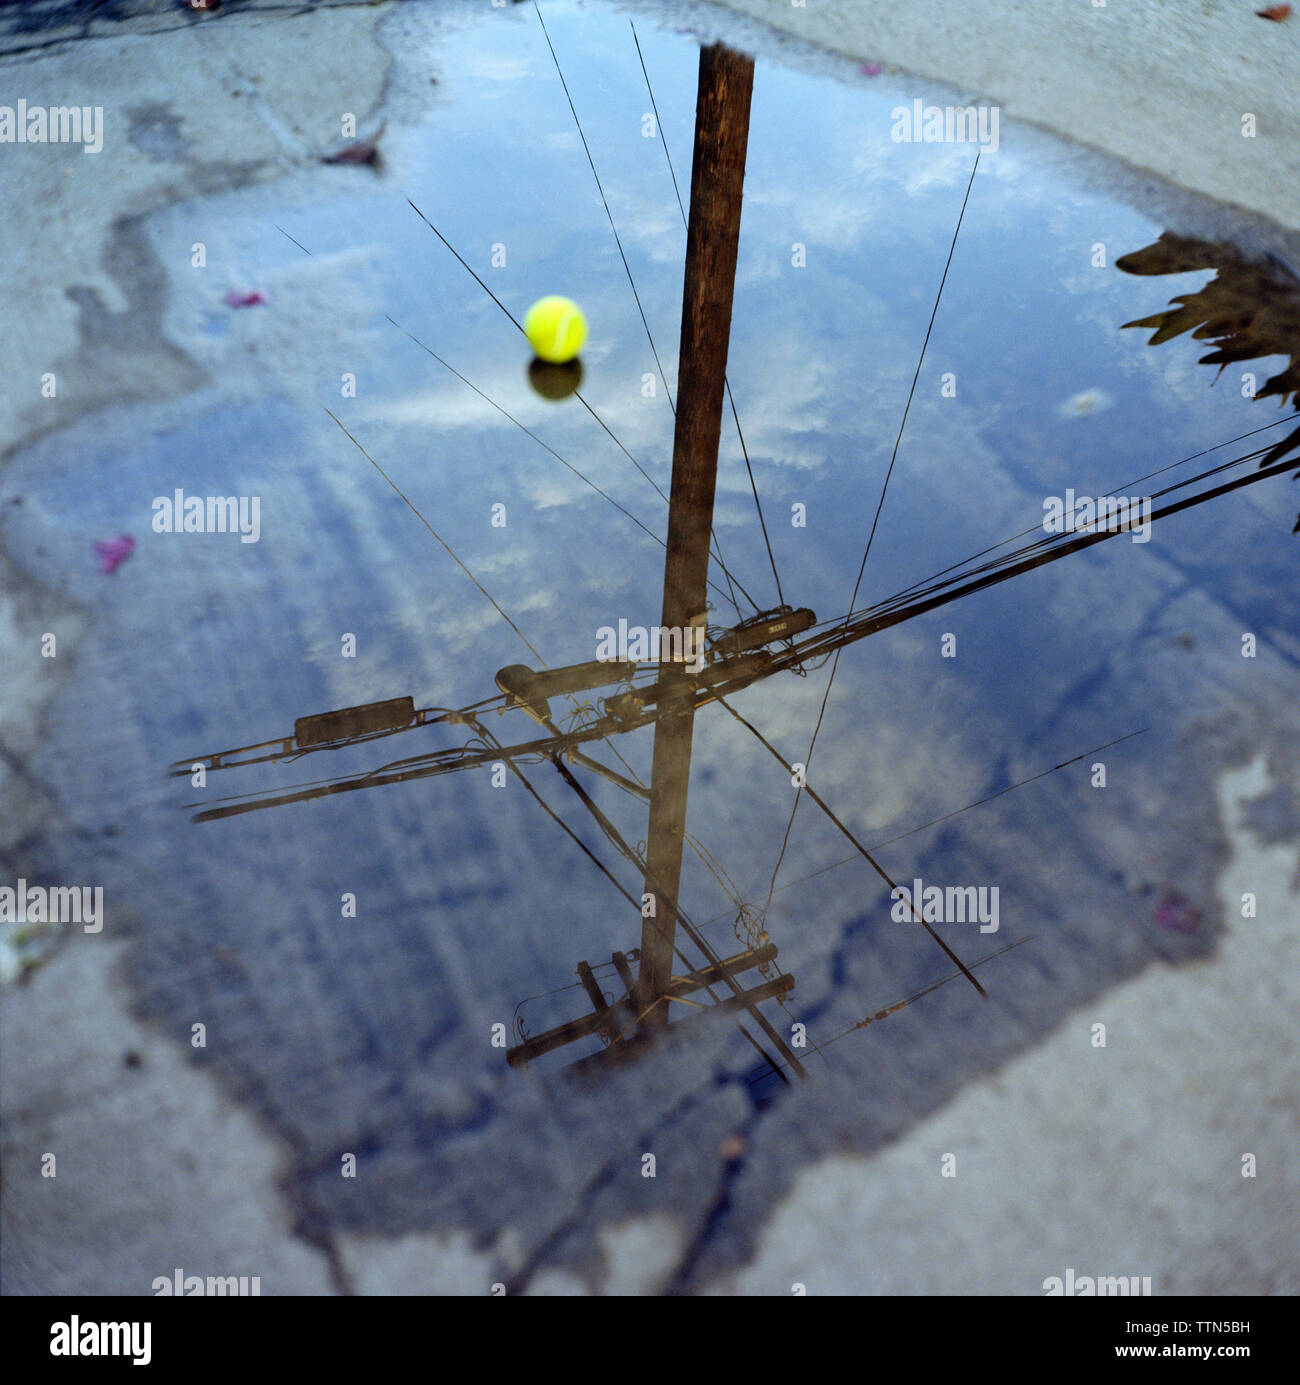 High angle view of ball and electricity pylon reflection in puddle on street Stock Photo